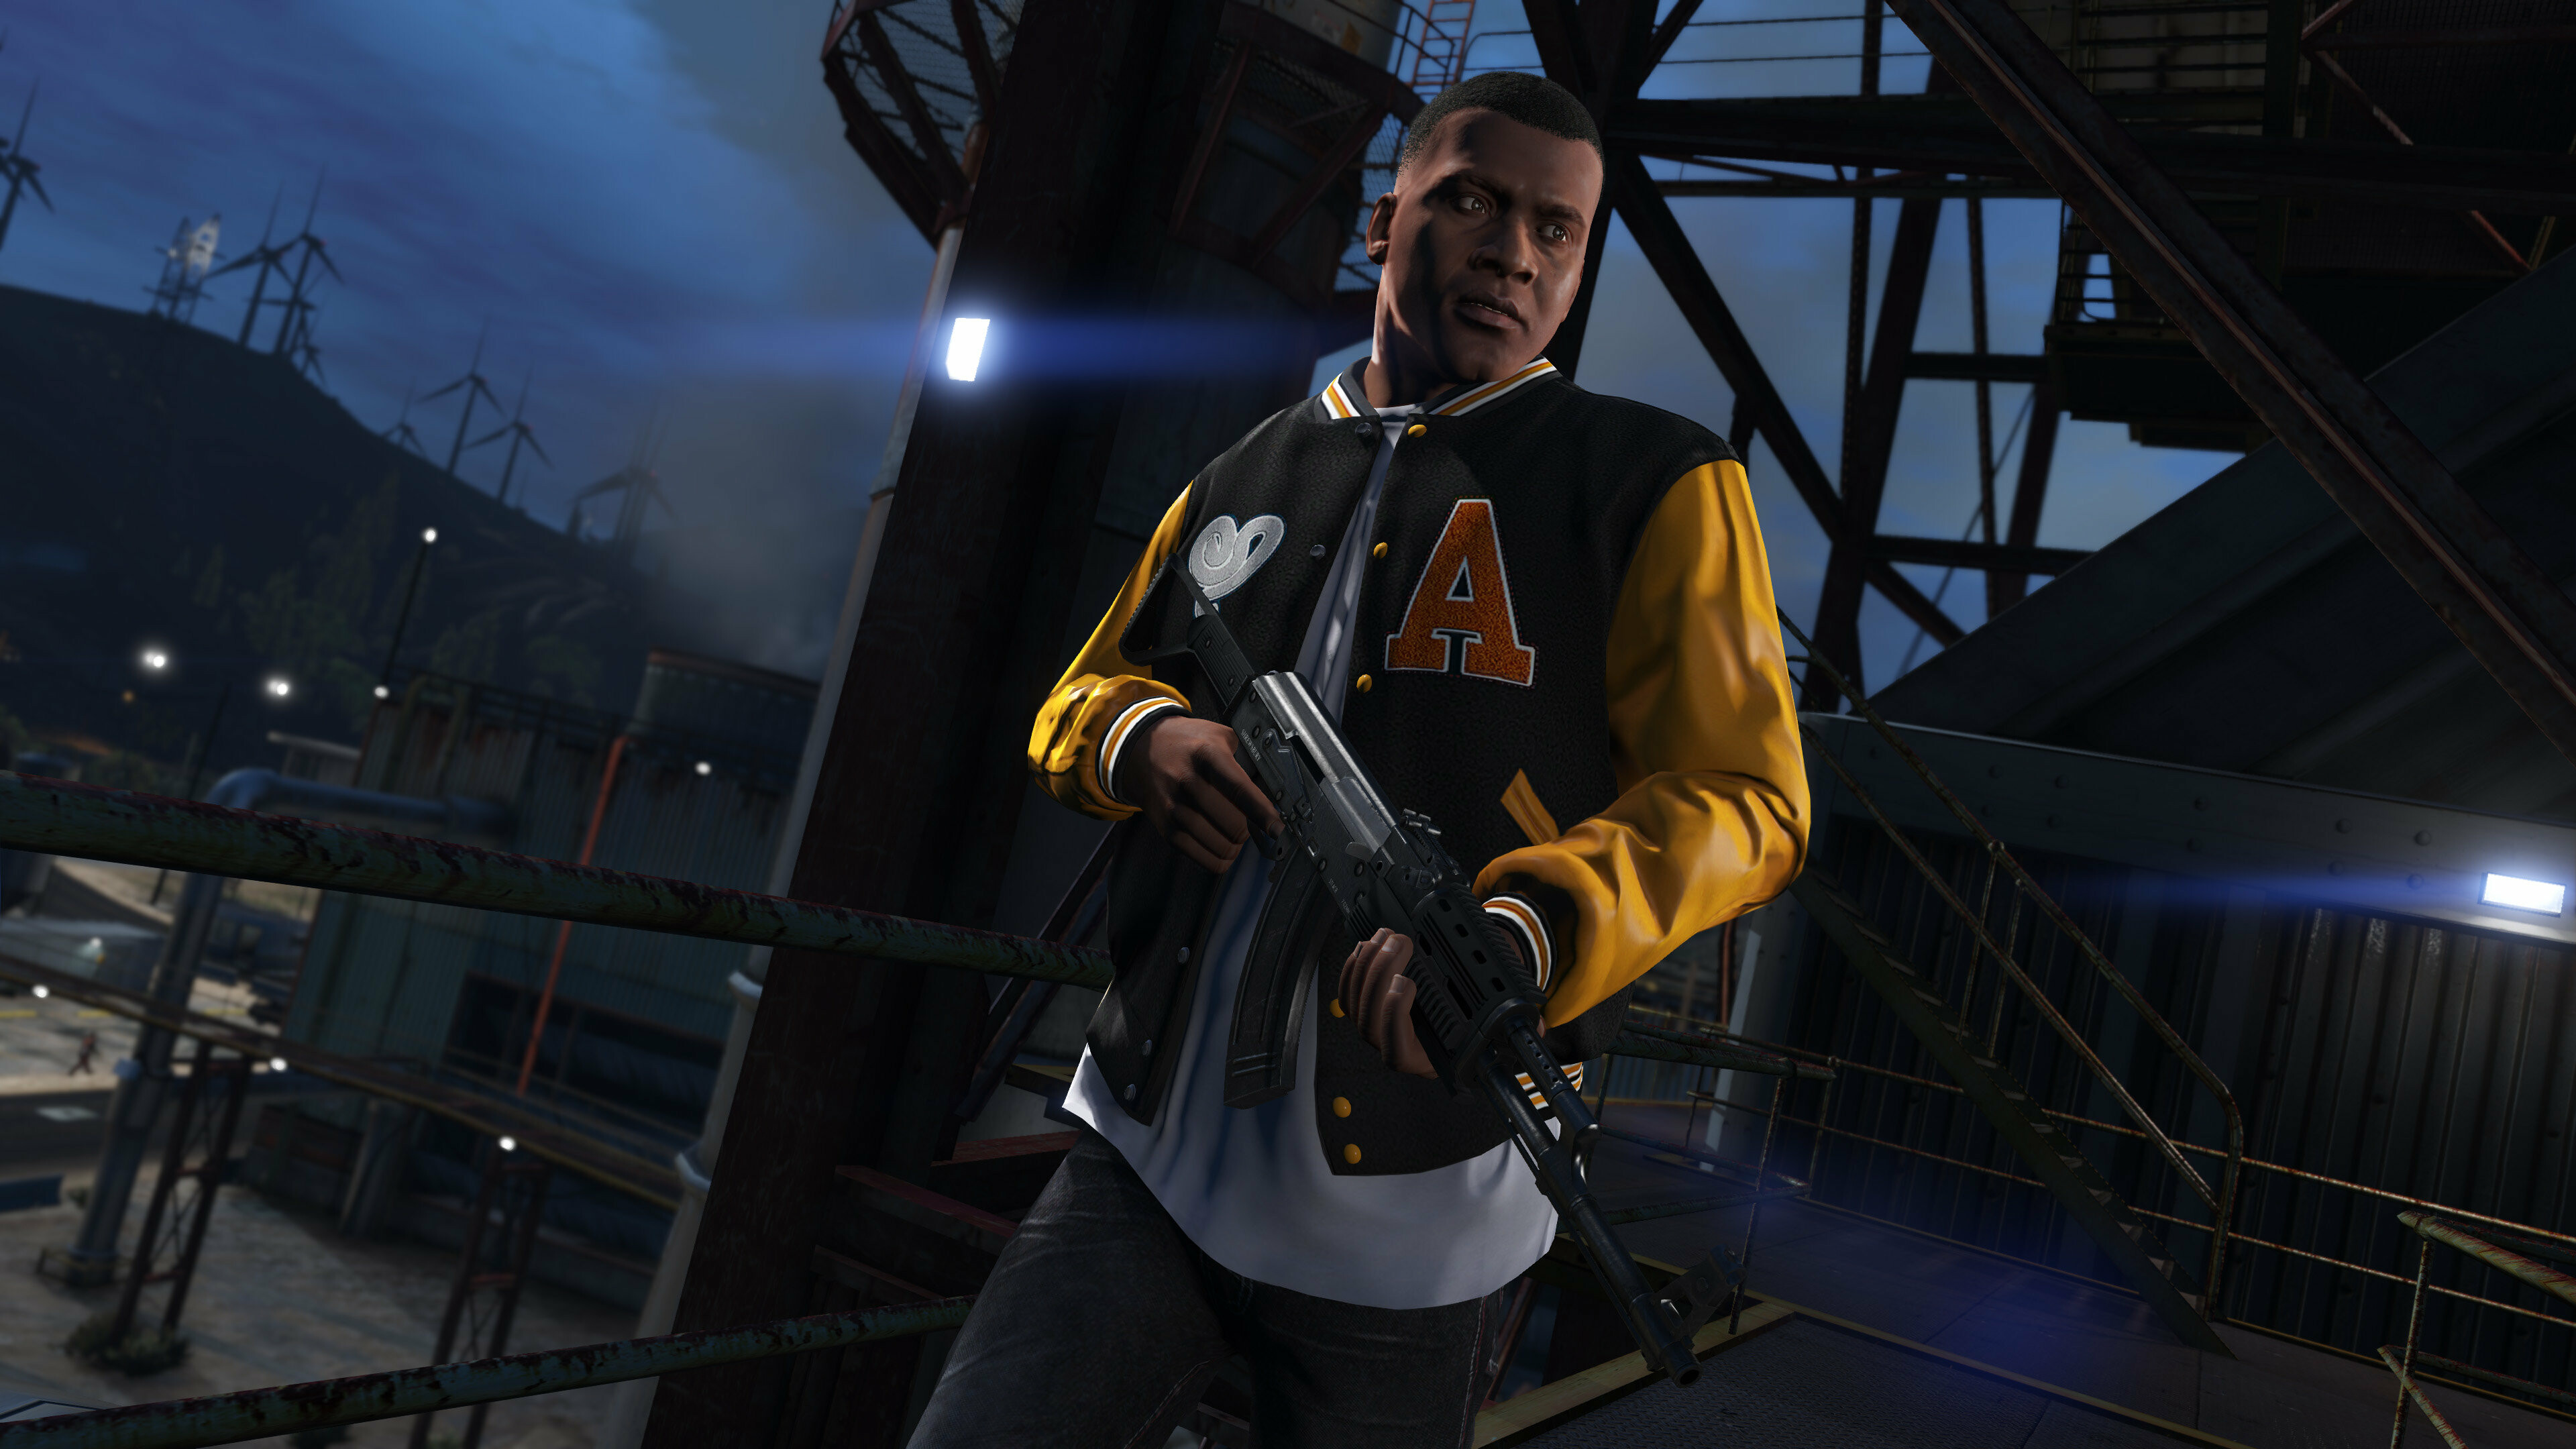 Grand Theft Auto 5: Franklin Clinton, One of the three protagonists in GTA 5. 3840x2160 4K Wallpaper.